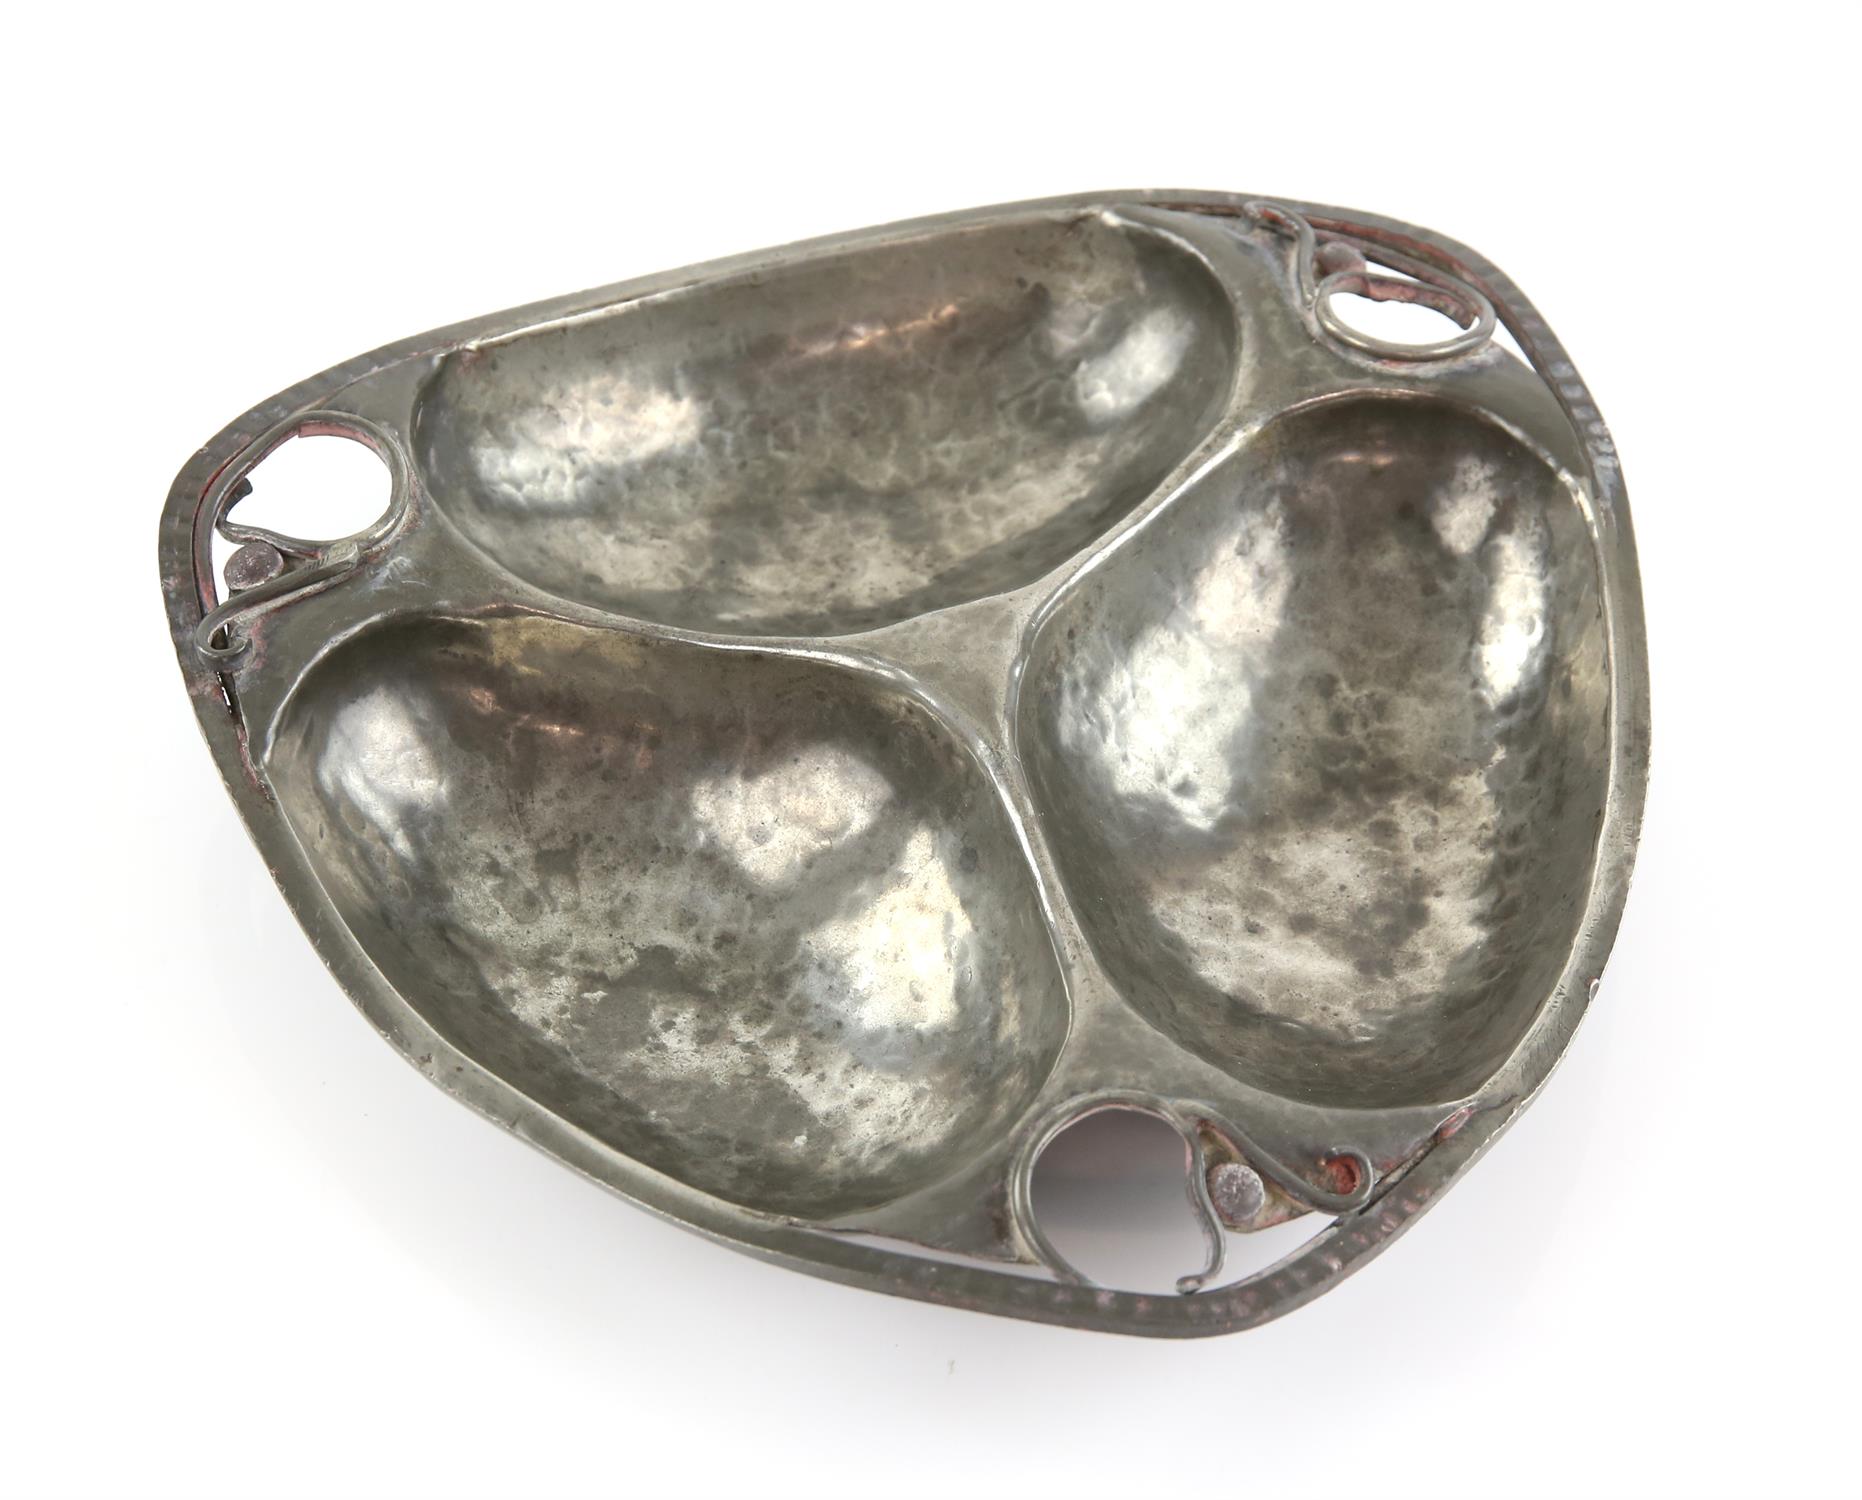 Serge Nekrassoff (Russian-American, 1895-1985), Art Nouveau style pewter hors d'oeuvres dish,